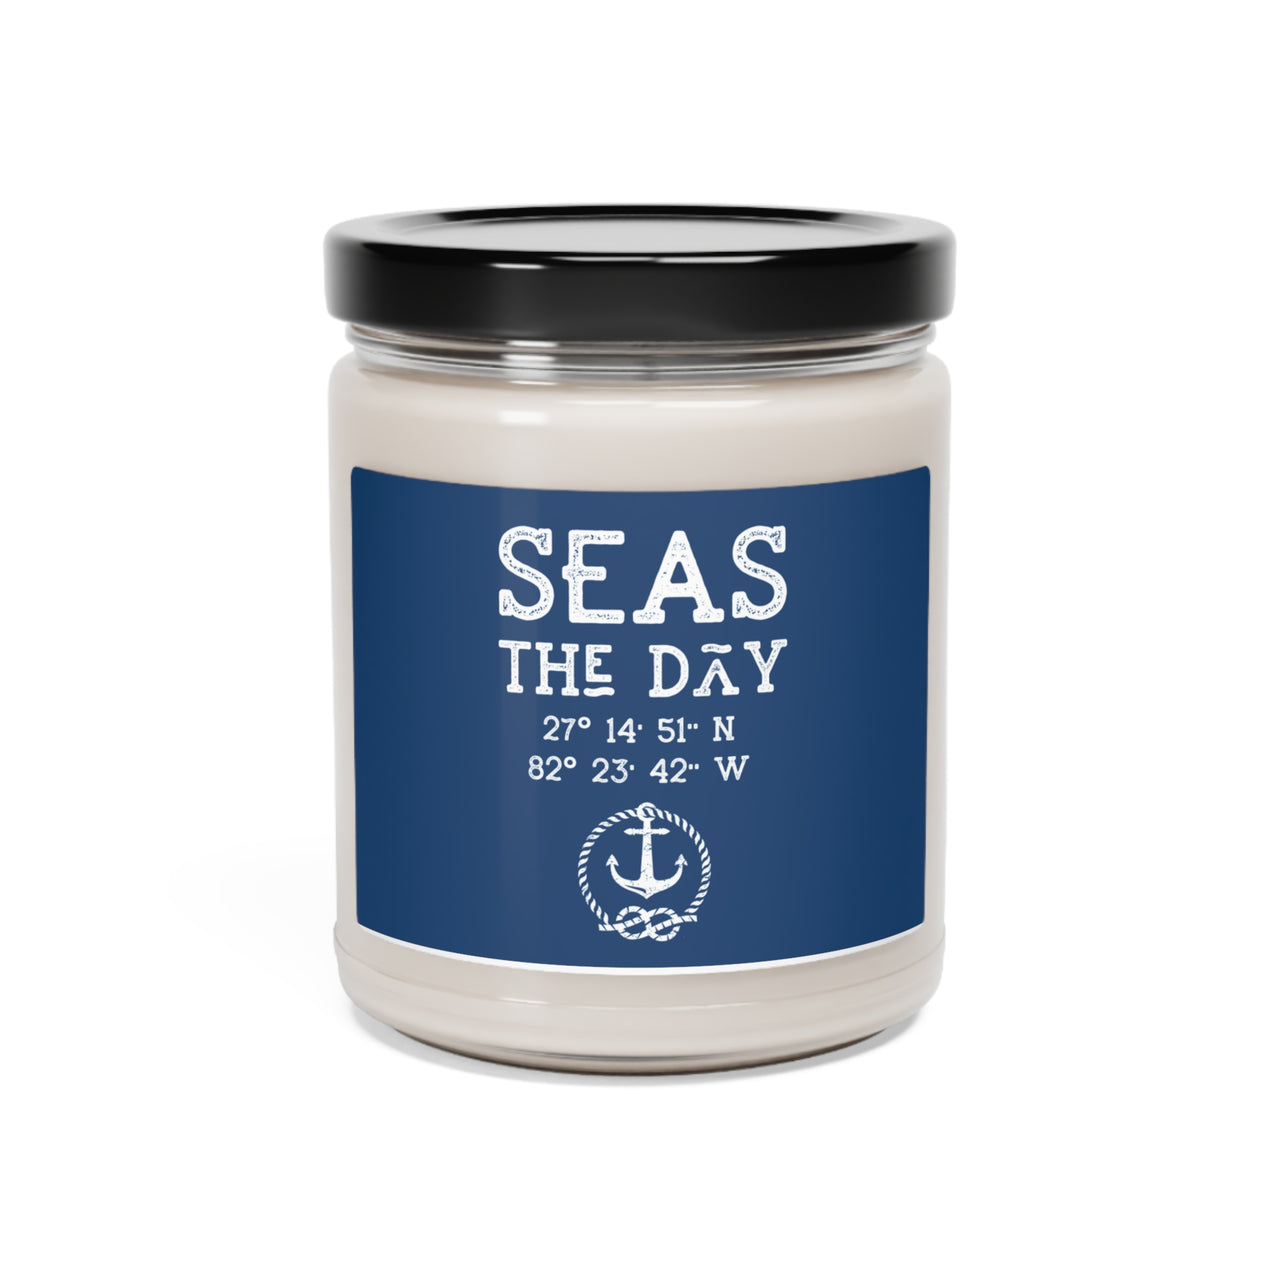 Seas the Day Personalized Soy Candle, 9oz, 4 Scents